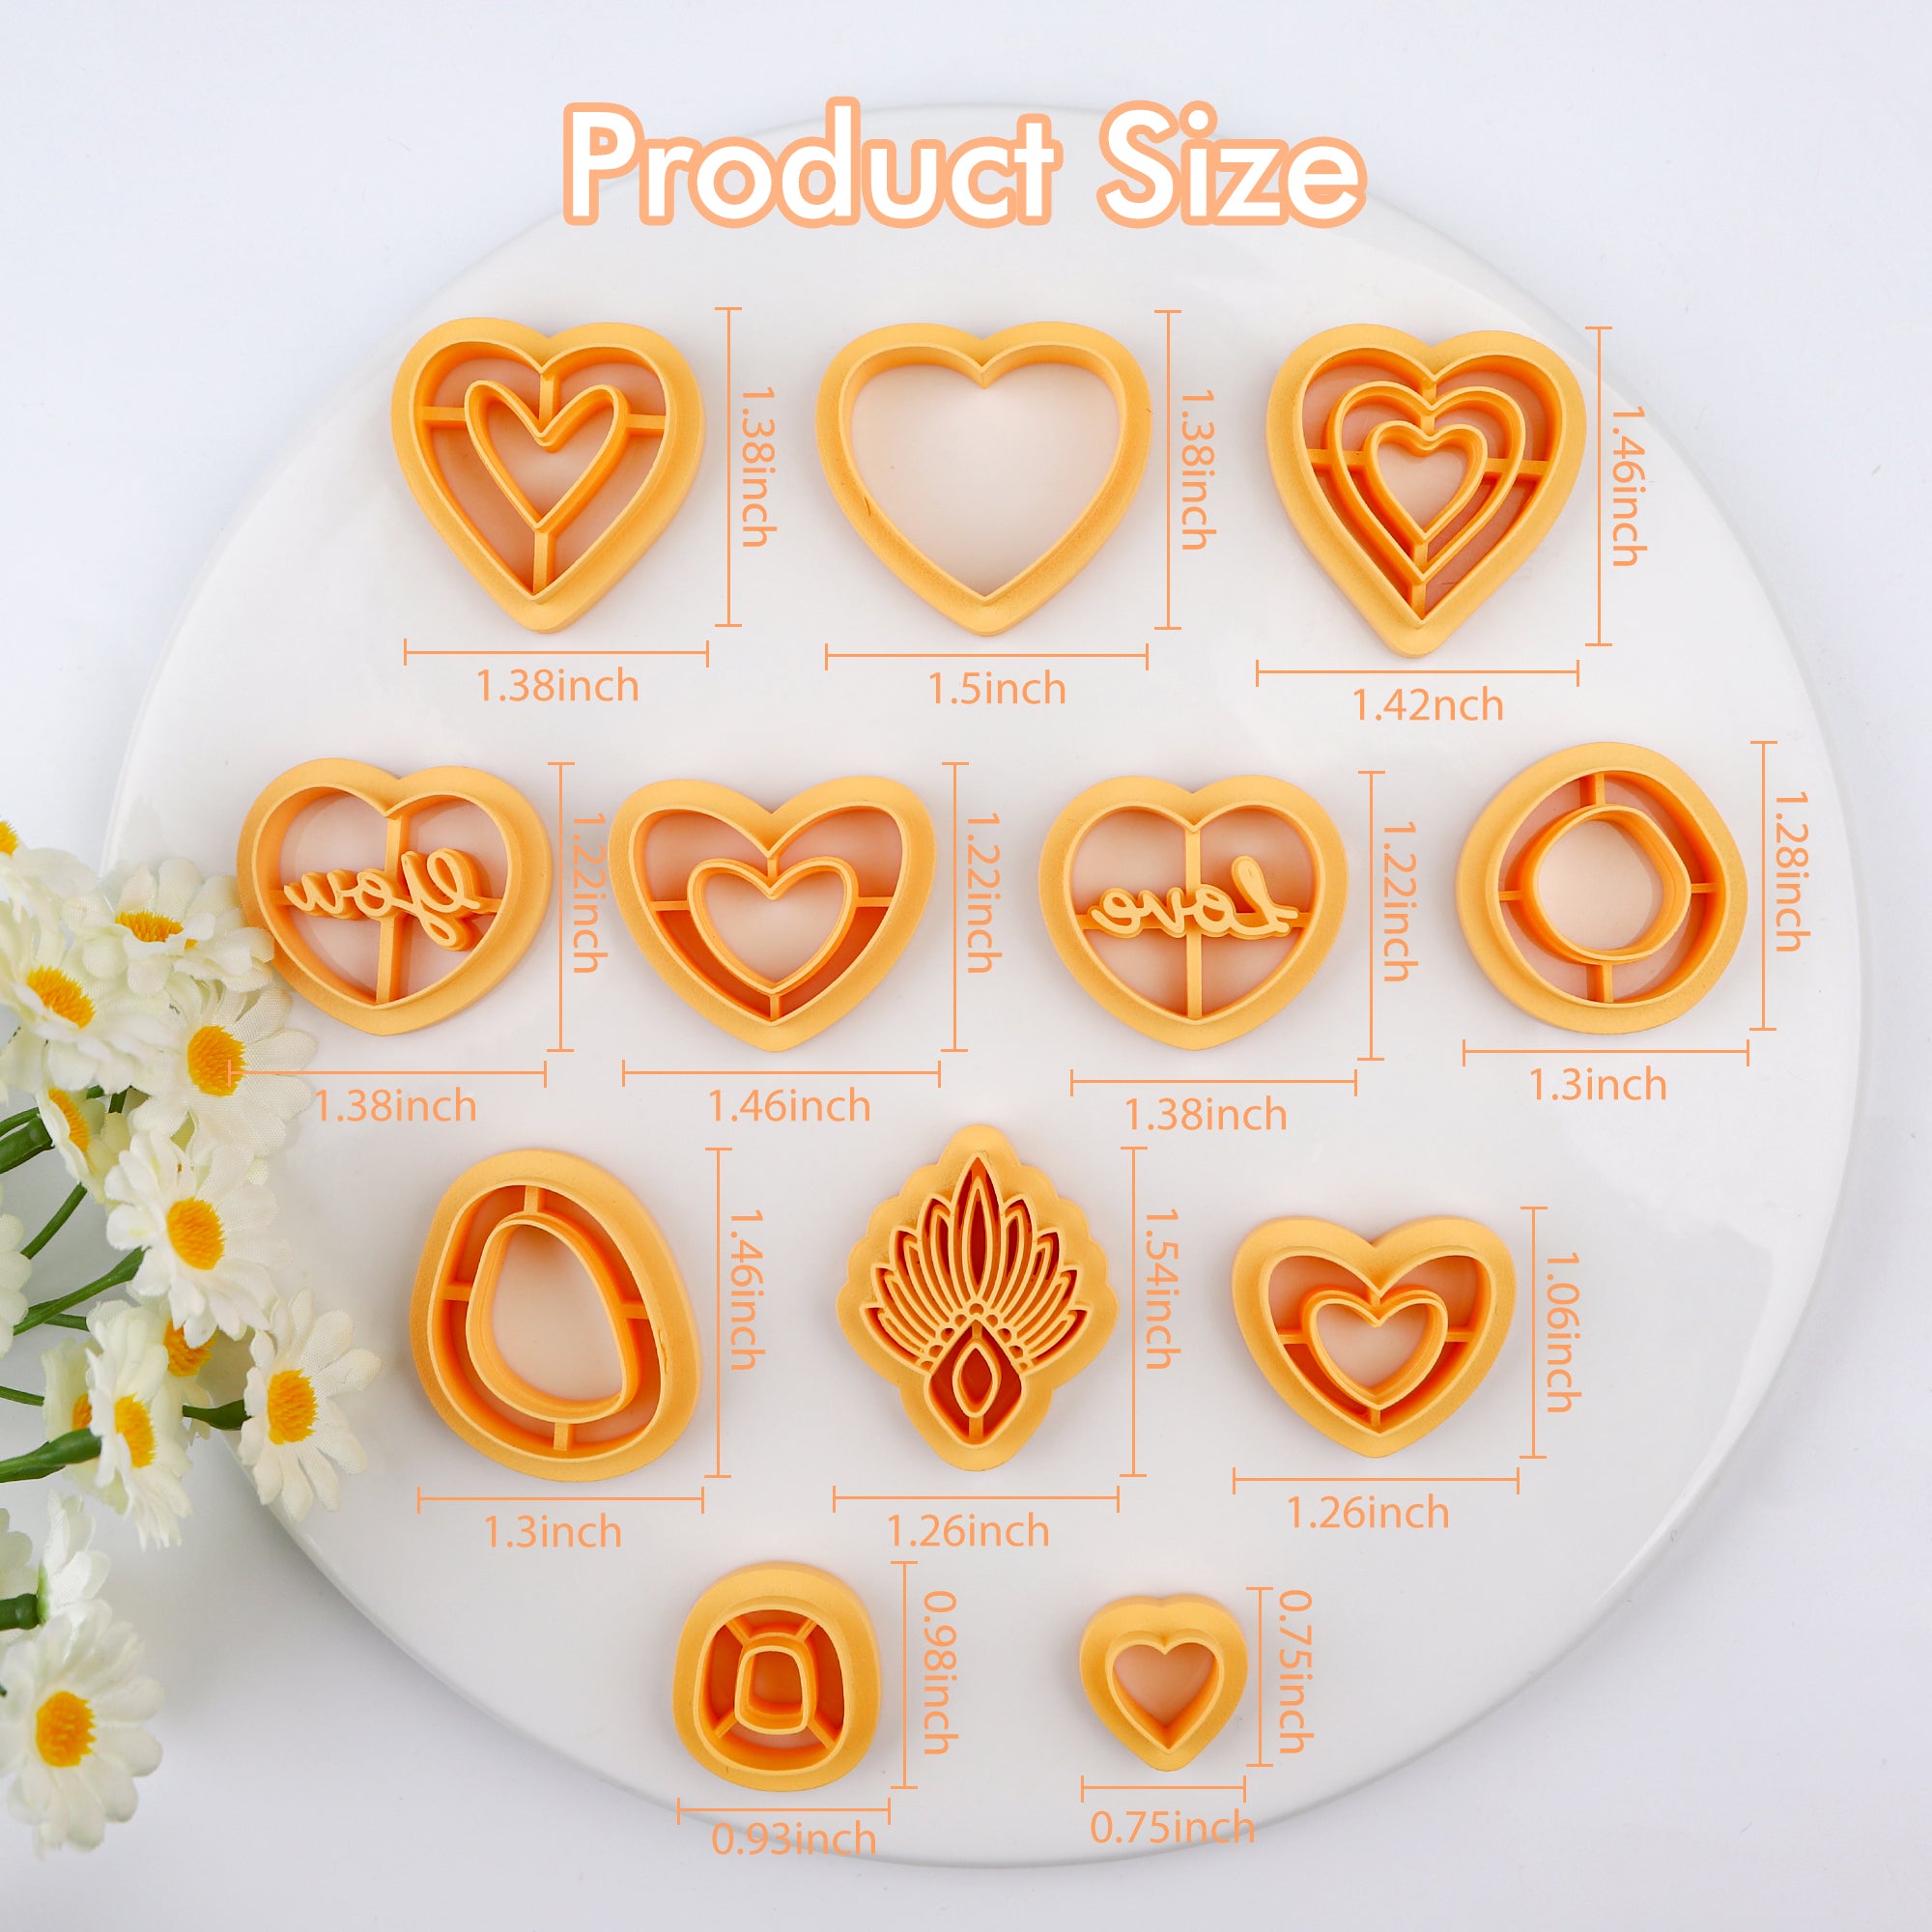 Puocaon Love Valentines Clay Earring Cutters 12 Pcs